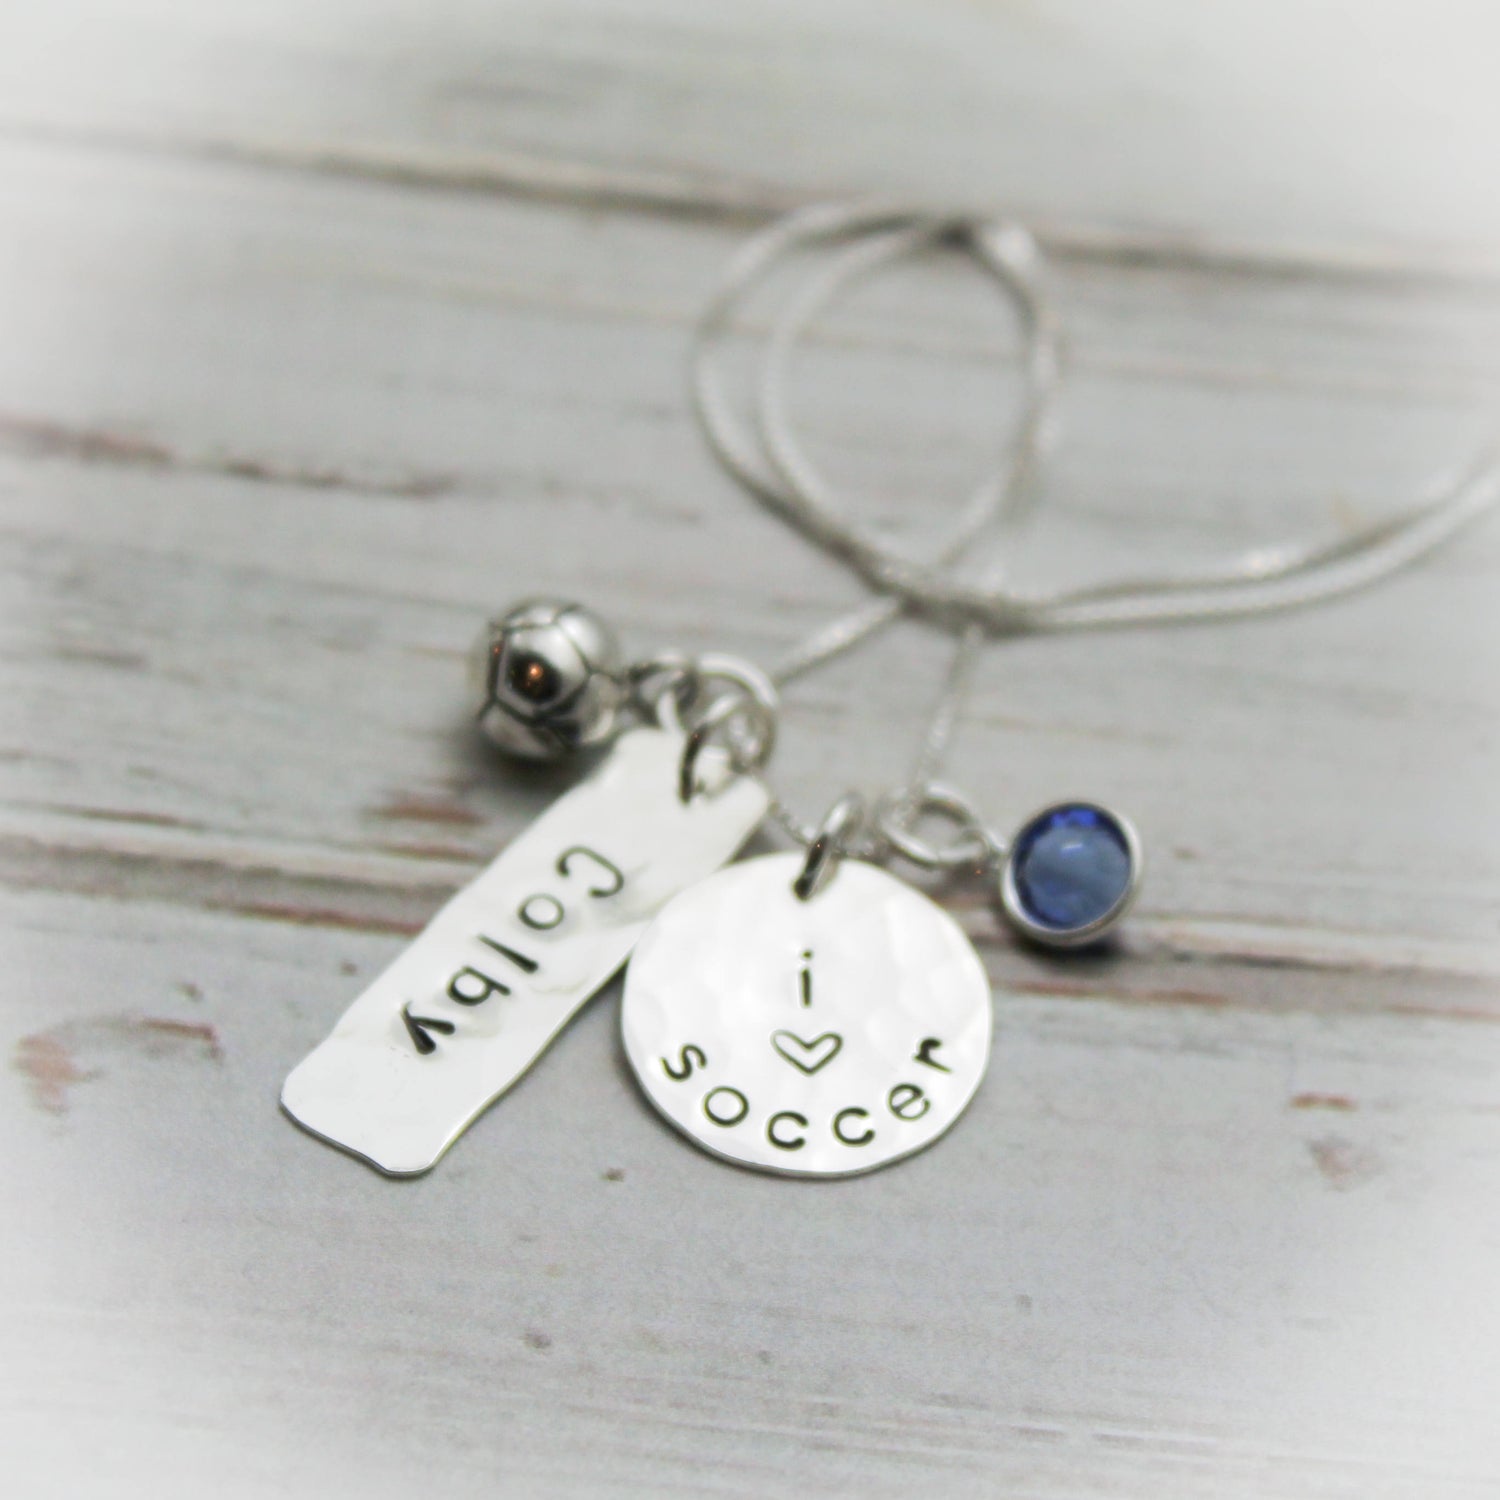 Personalized Soccer Necklace, Soccerball Necklace, Soccer Girl Necklace, Soccer Jewelry, Soccer Team Jewelry, Hand Stamped Sterling Silver